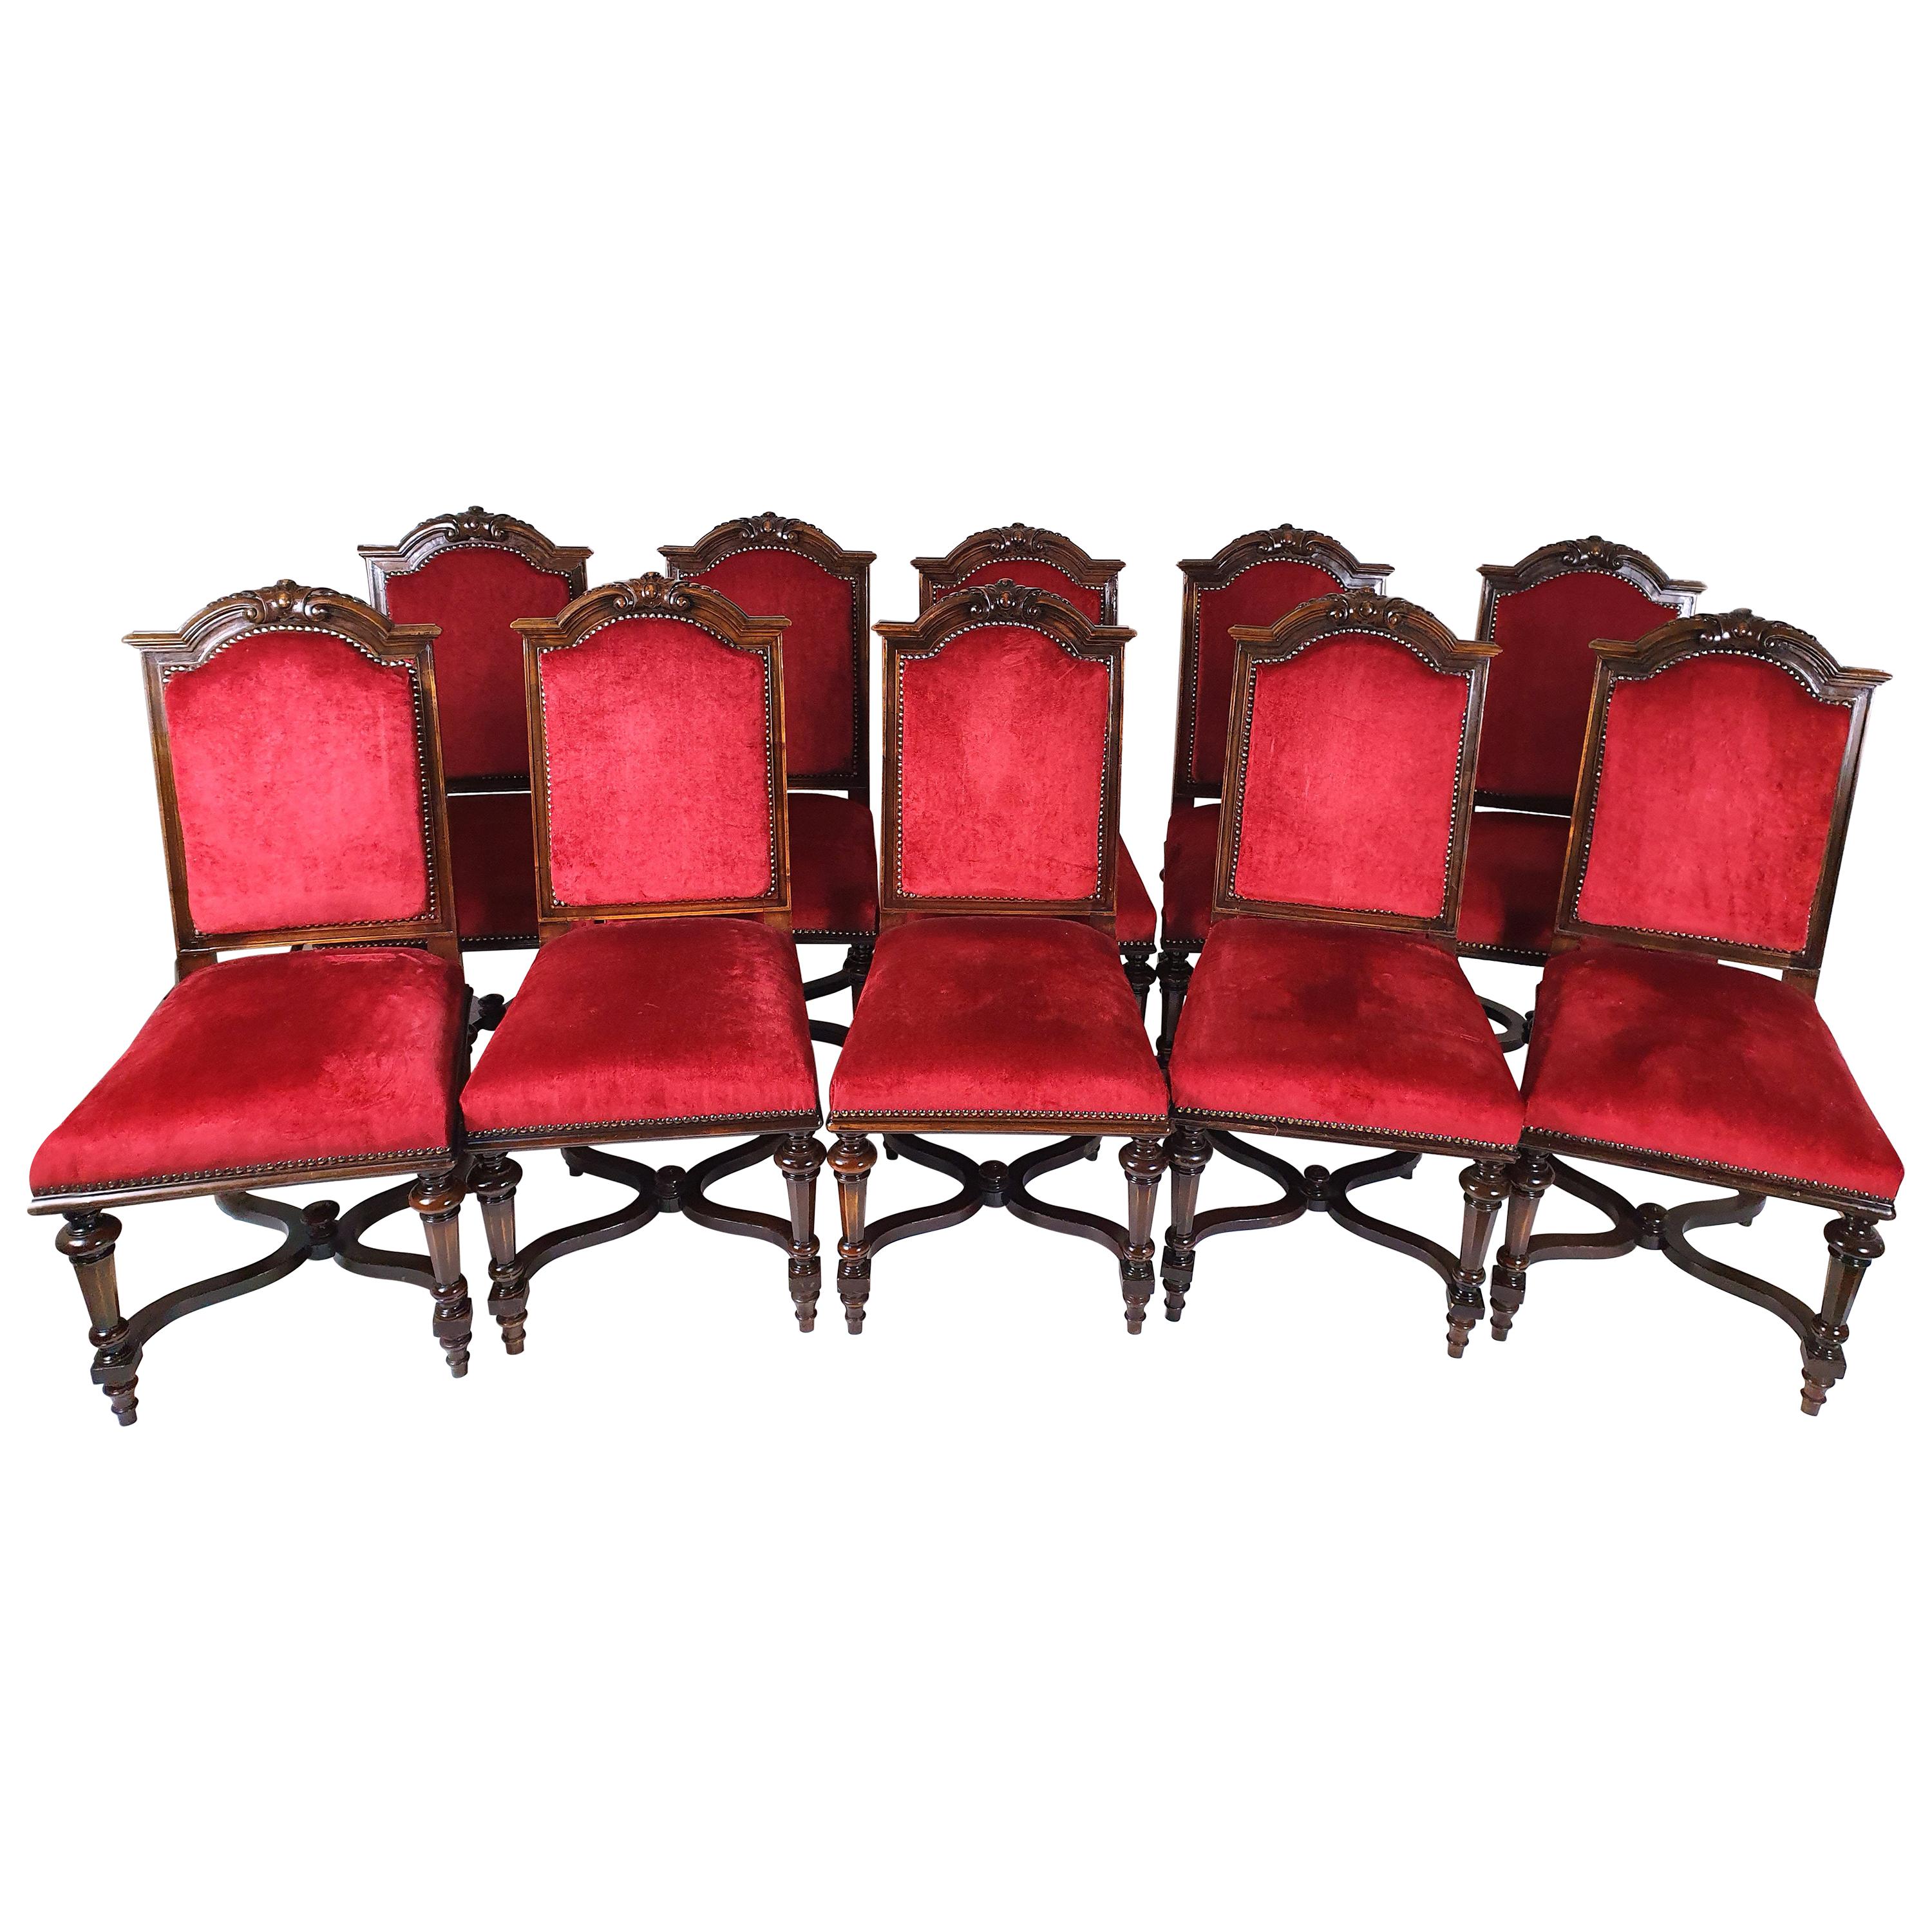 Set of 10 French 19th Century Carved Walnut Dining Chairs